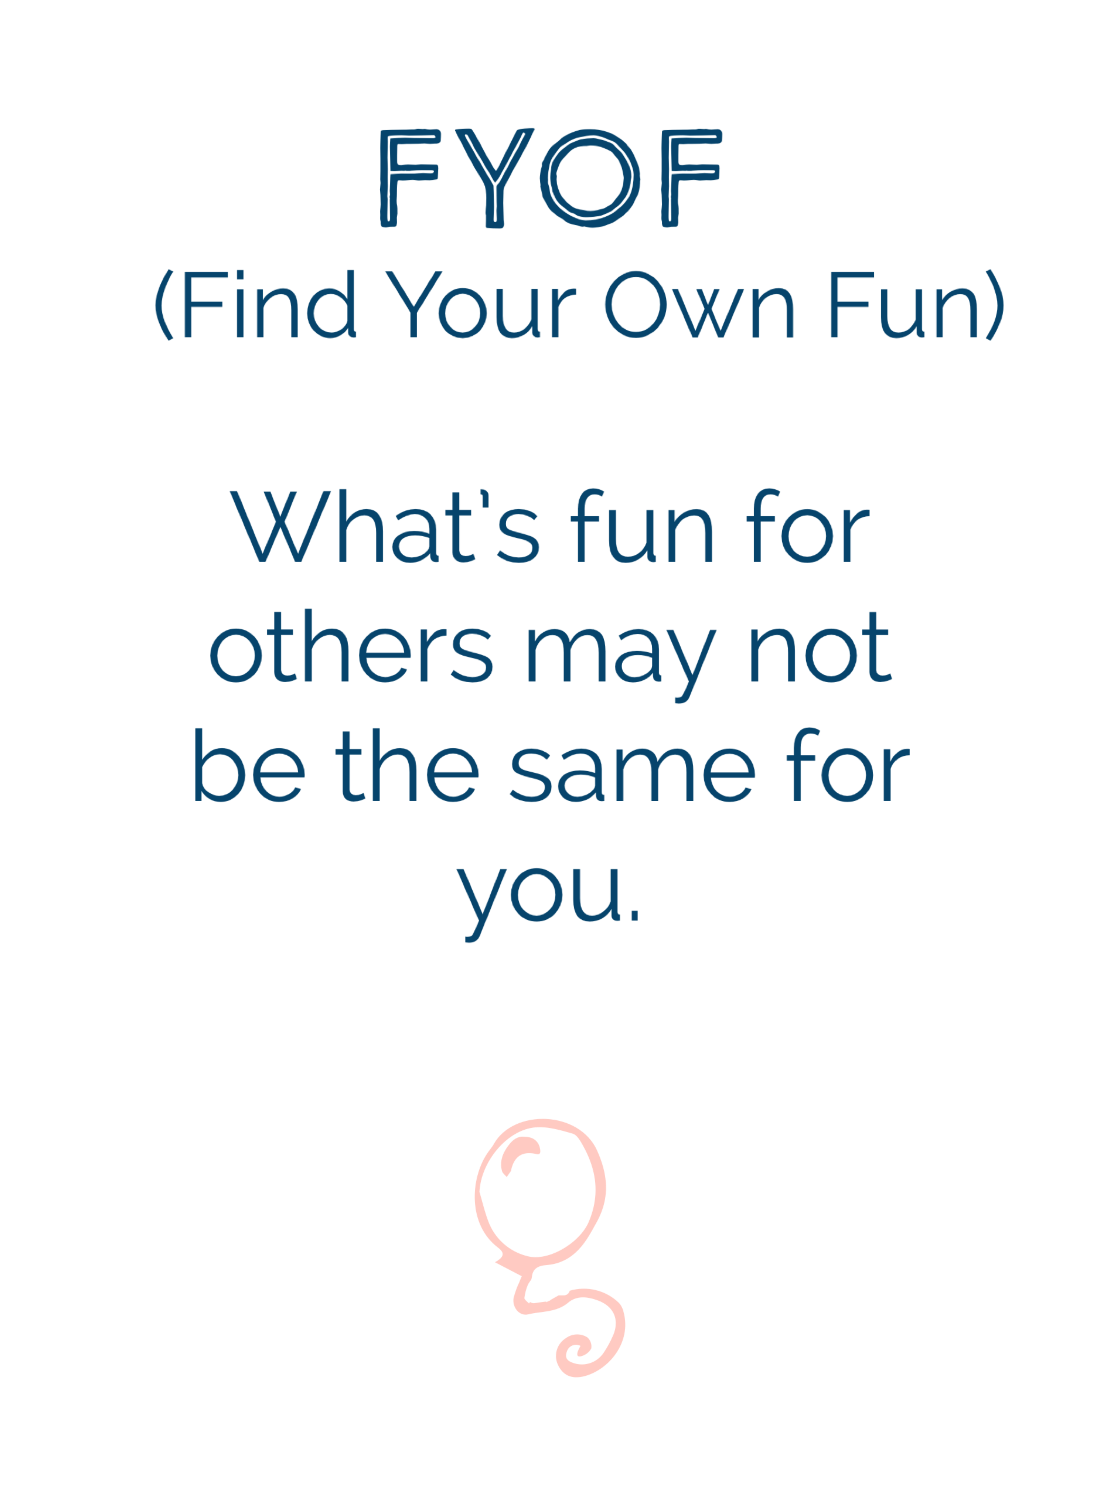 Find Your Own Fun